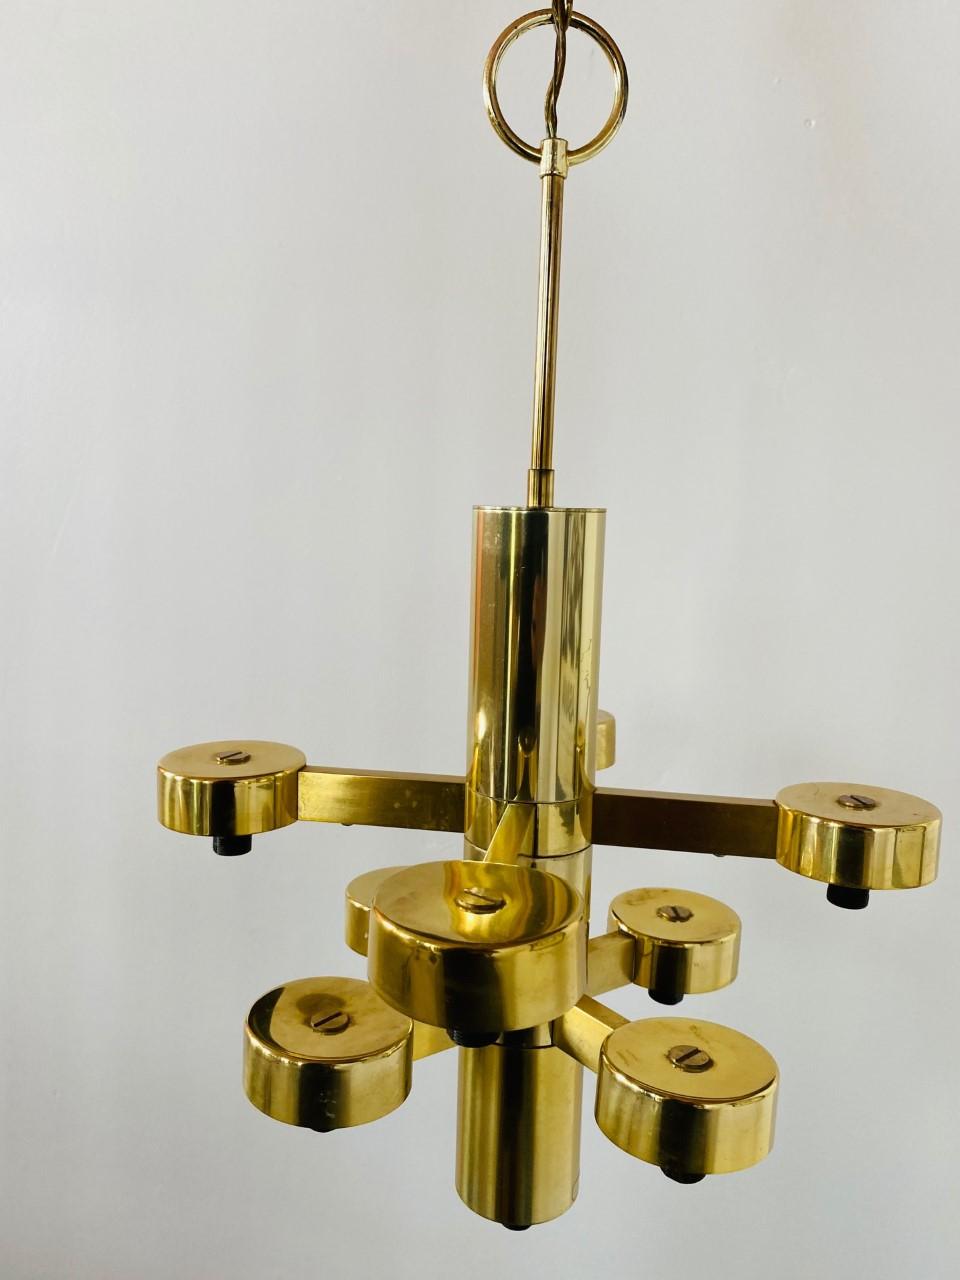 Vintage Gaetano Sciolari chandelier by Lightolier. A mid-century original, this piece is glamourous and sculptural. The piece has multiple levels of frosted glass cubes on a brass structure. Designed in Italy in the 1970s, this piece is in great